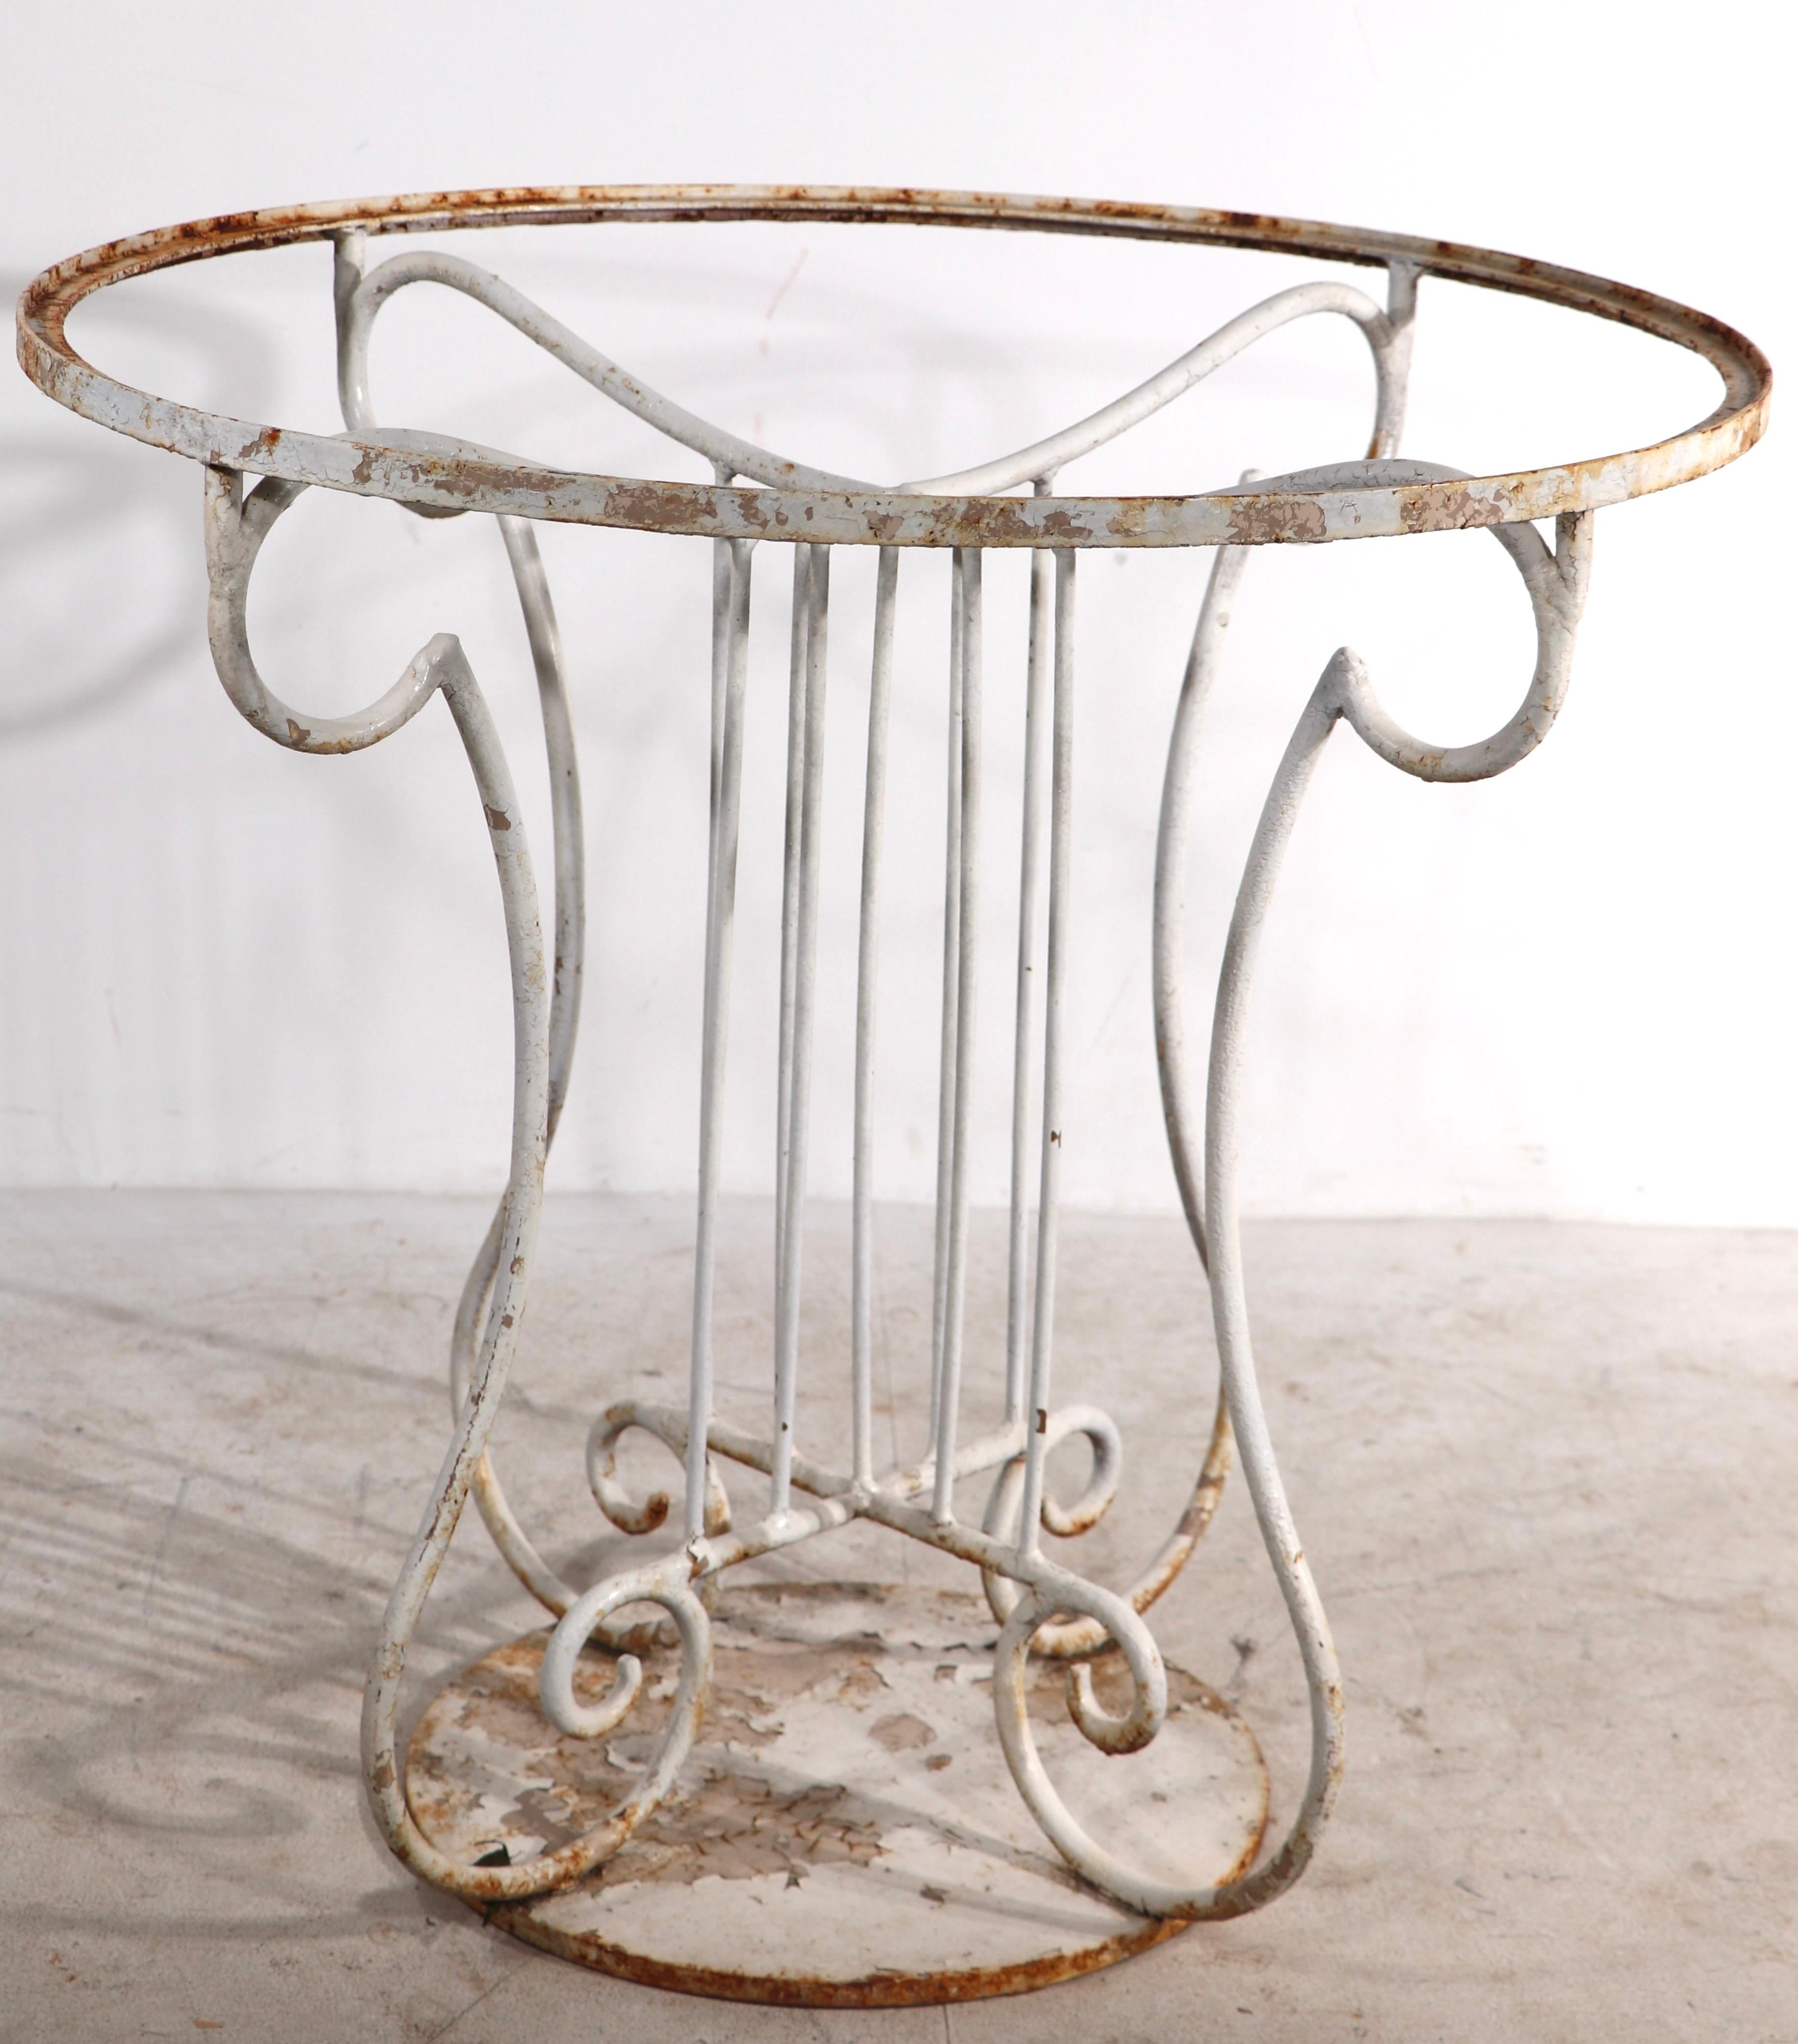 Art Deco Wought Iron Garden Patio Poolside Dining Center Table For Sale